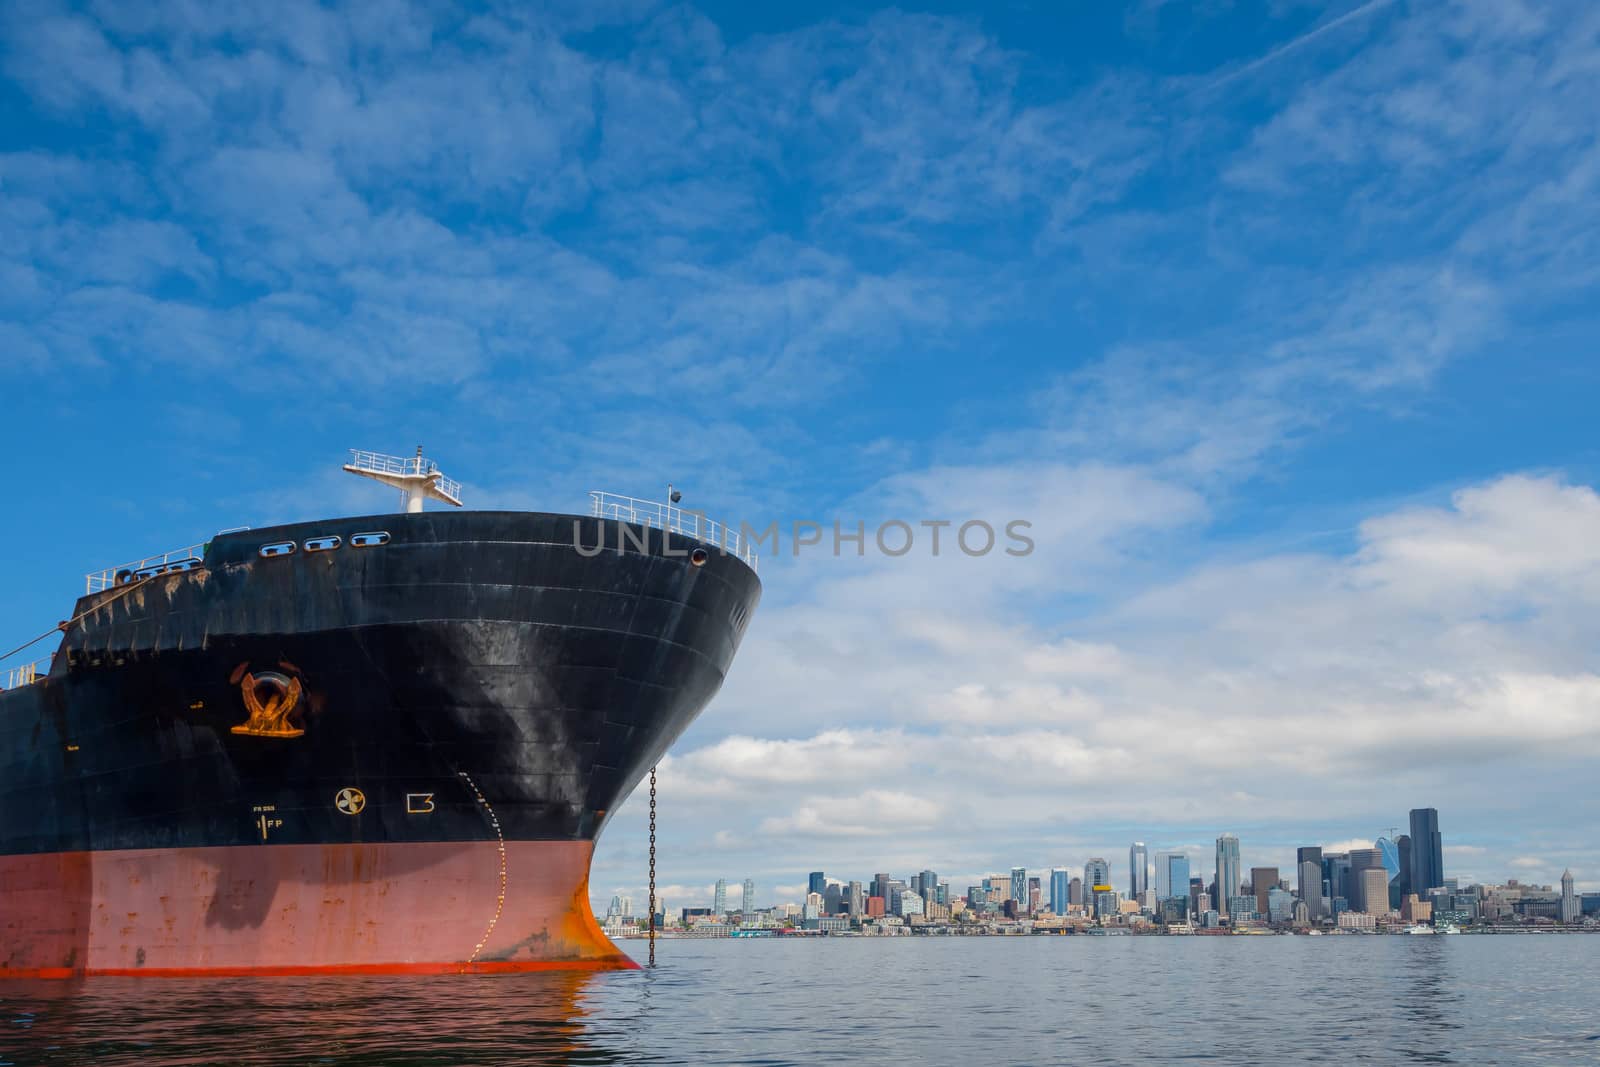 Bulk Carrier at anchor in Seattle's Elliott Bay on Sunny, windless day with city in background